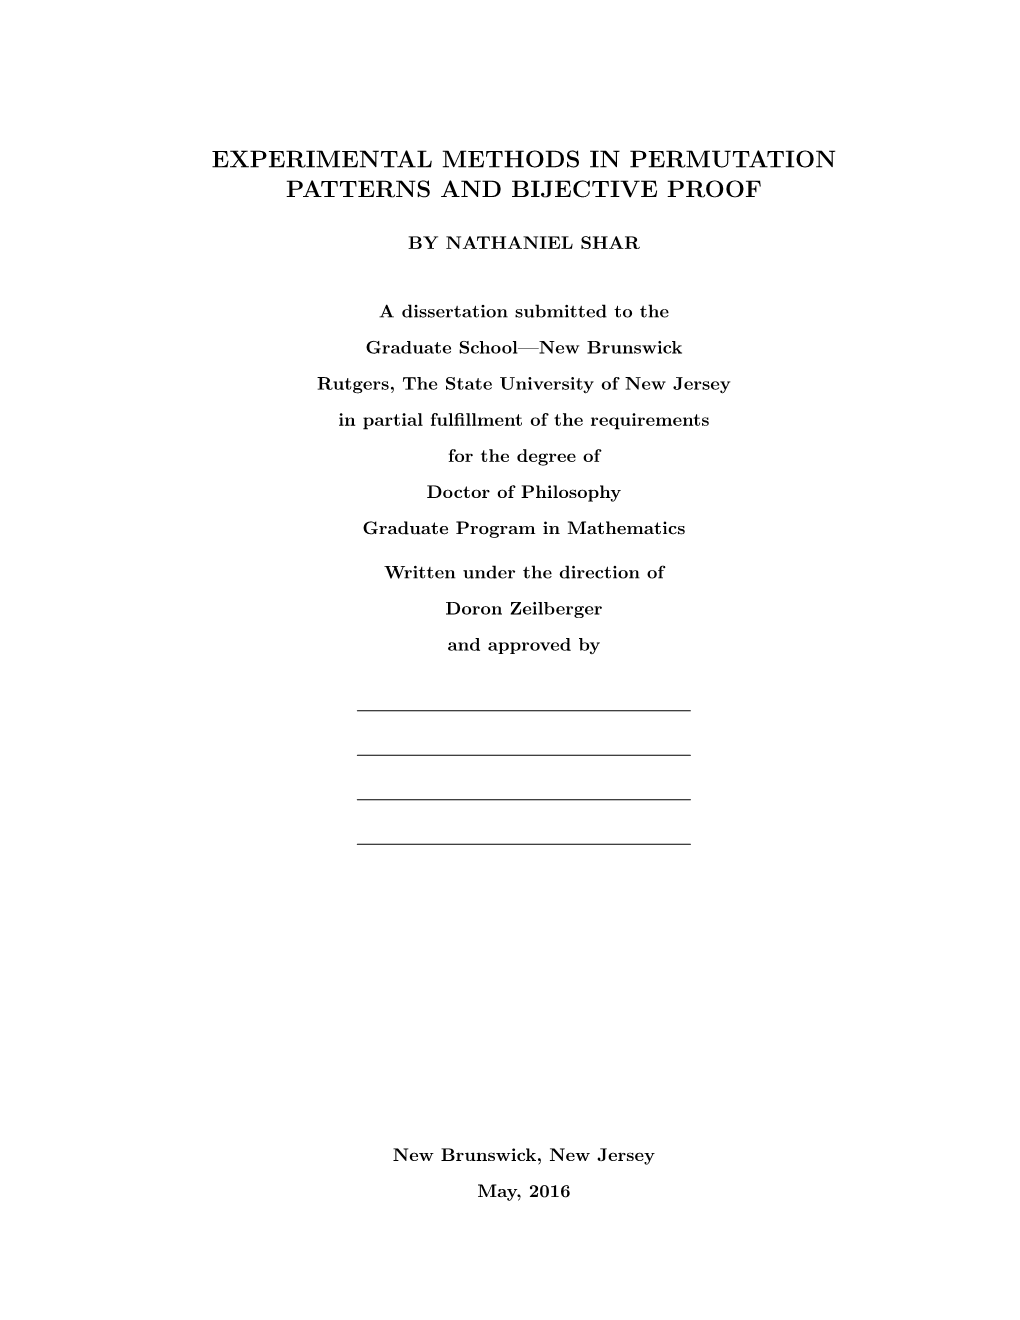 Experimental Methods in Permutation Patterns and Bijective Proof